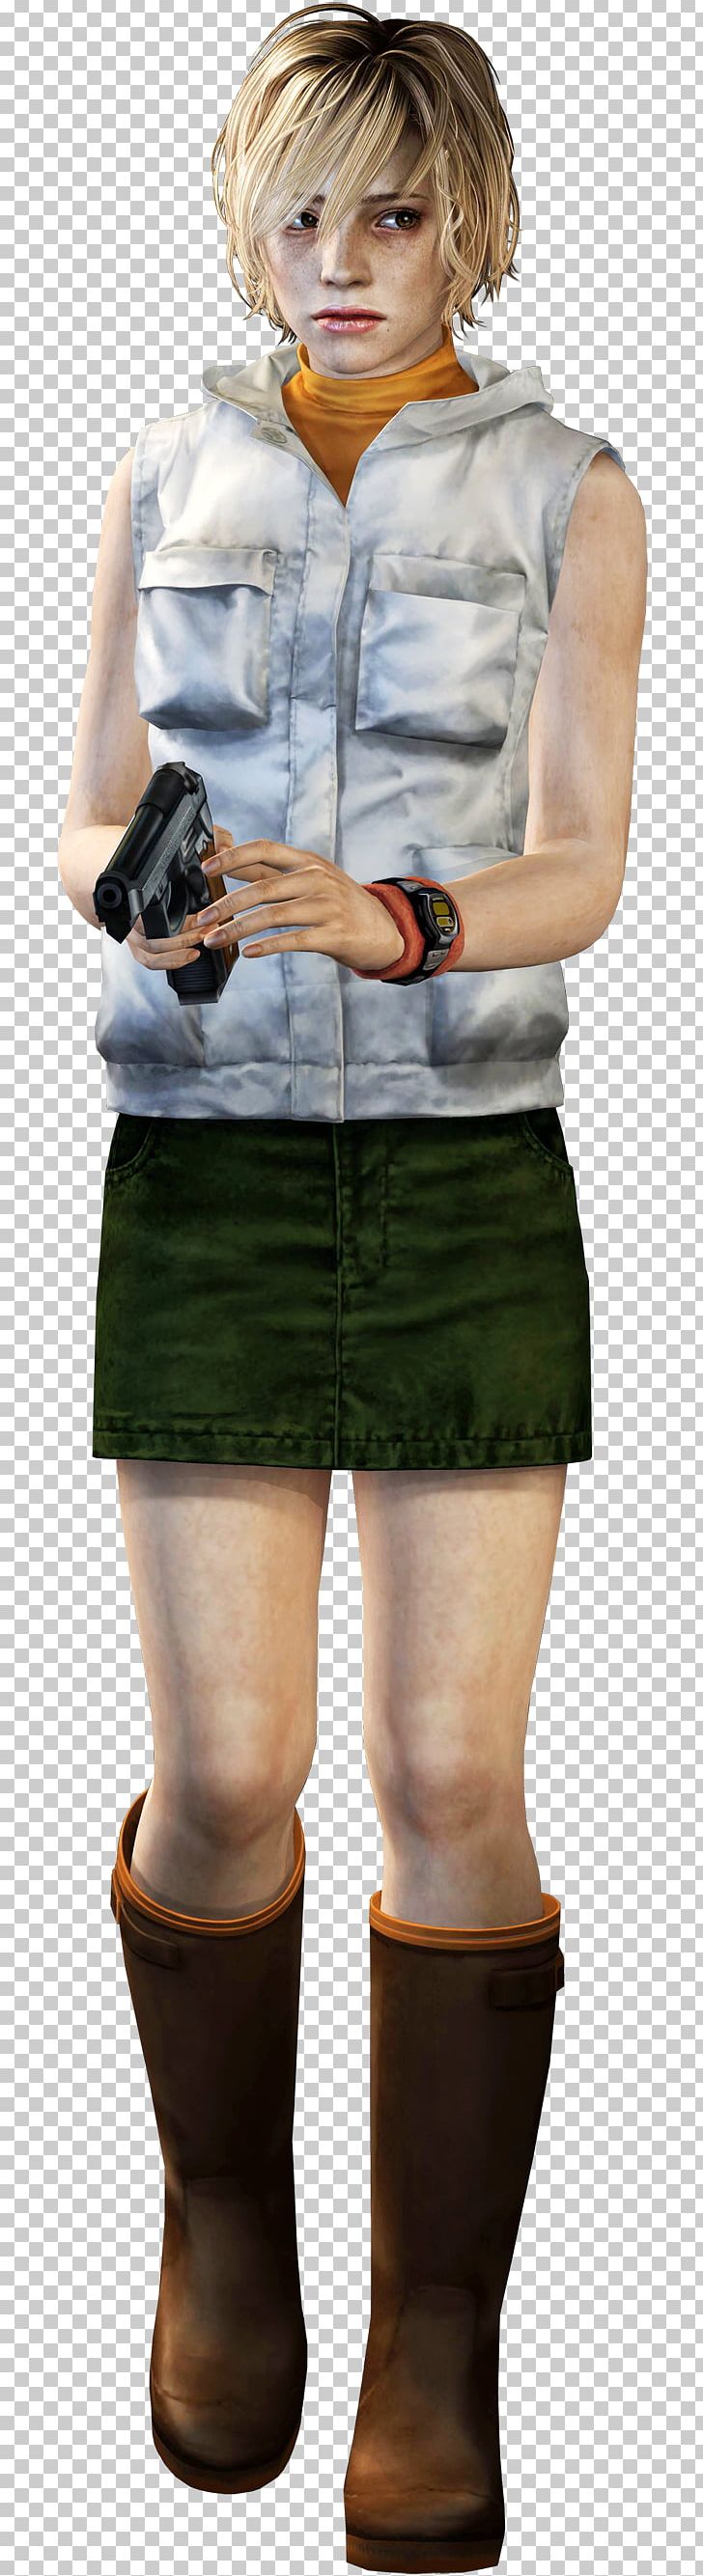 Silent Hill 3 Heather Mason Silent Hill 2 Alessa Gillespie PNG, Clipart, Alessa Gillespie, Character, Costume, Female, Figurine Free PNG Download